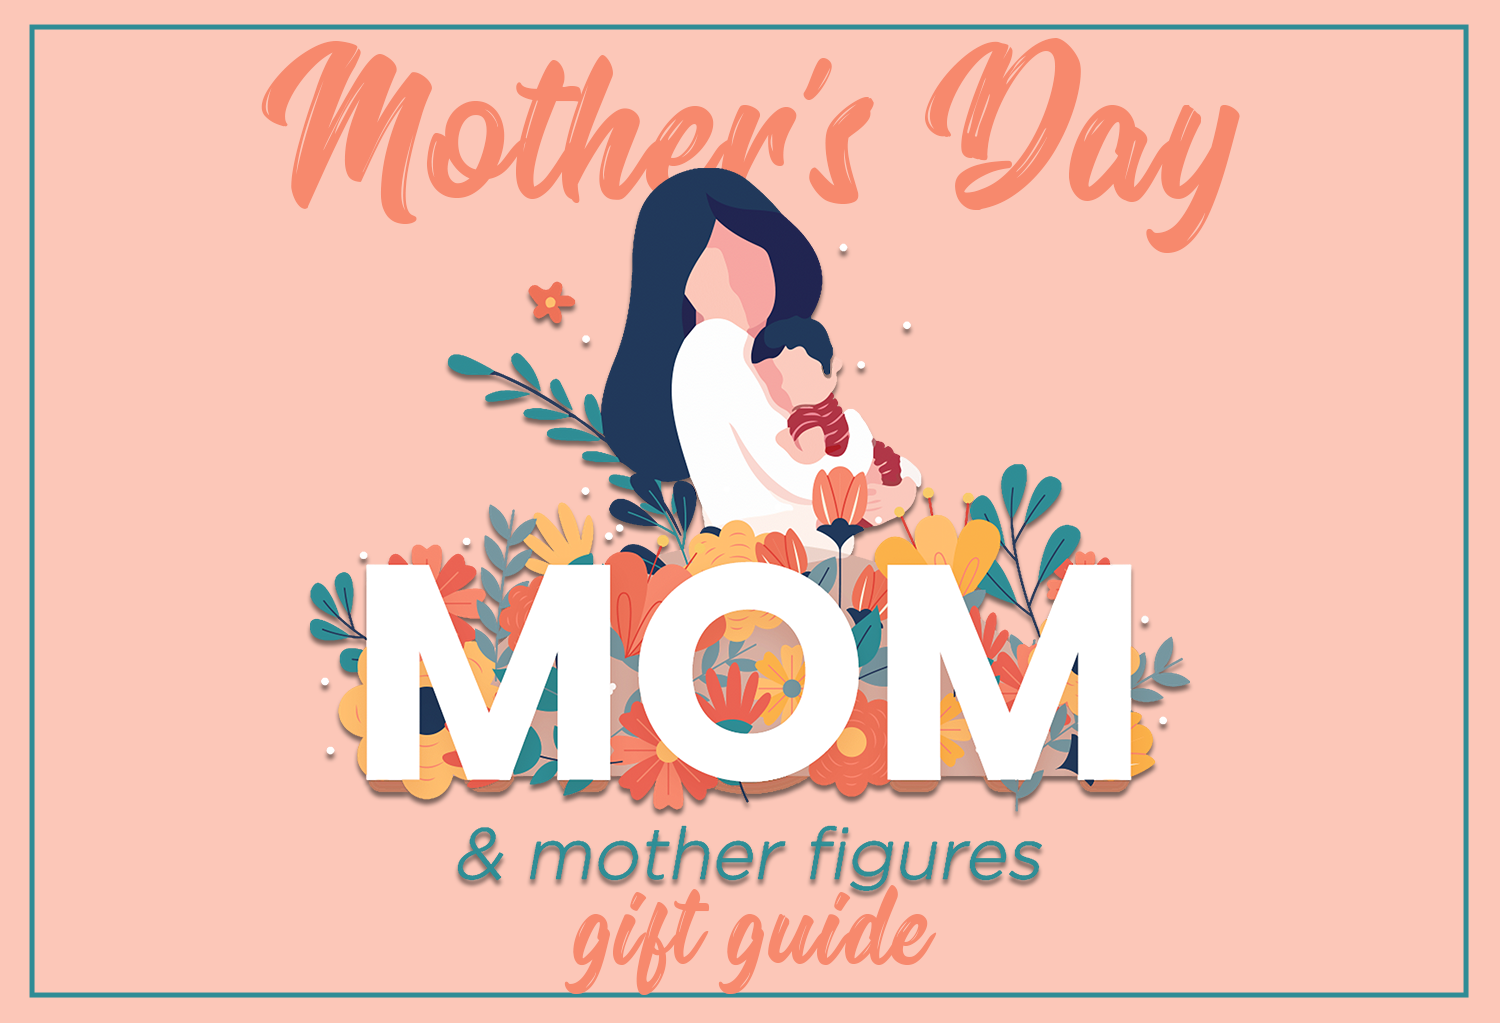 Mother's Day 2022 Gift Guide - Atlanta Jewish Times